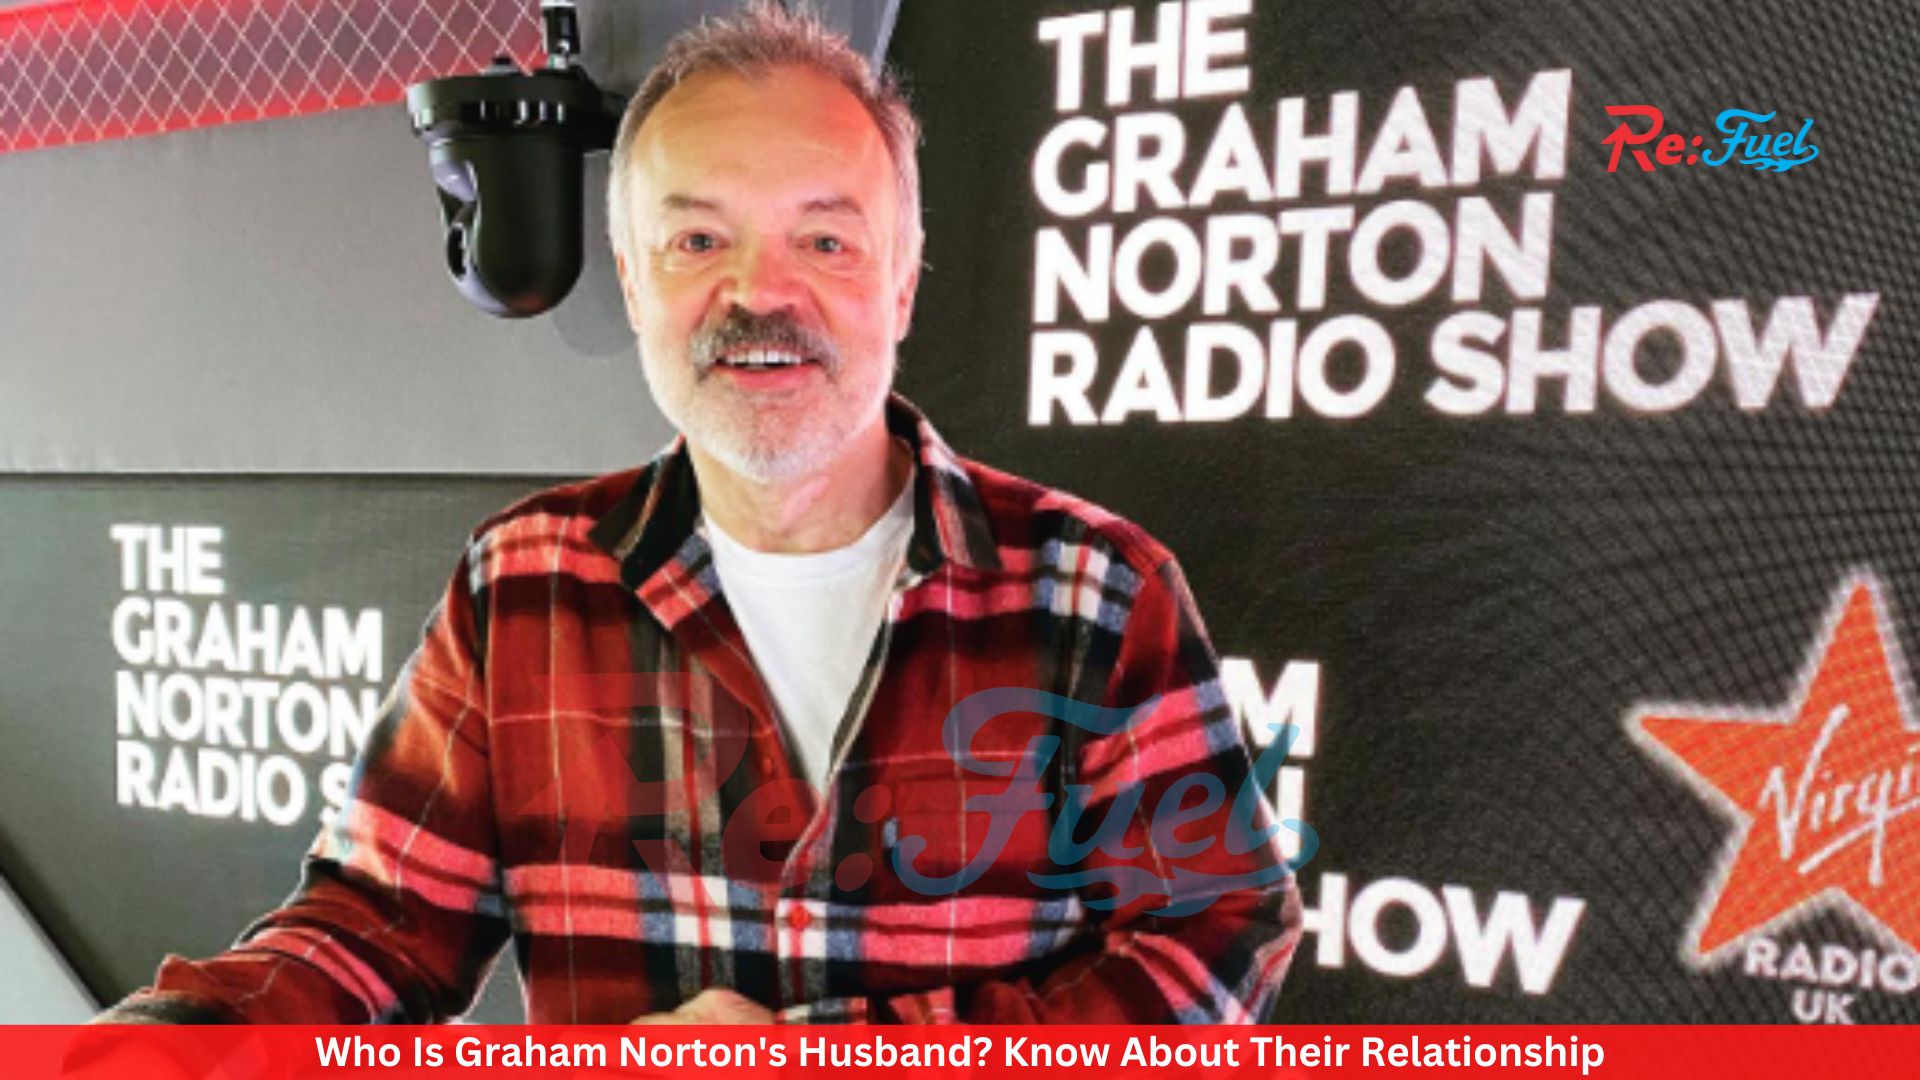 Who Is Graham Norton's Husband? Know About Their Relationship